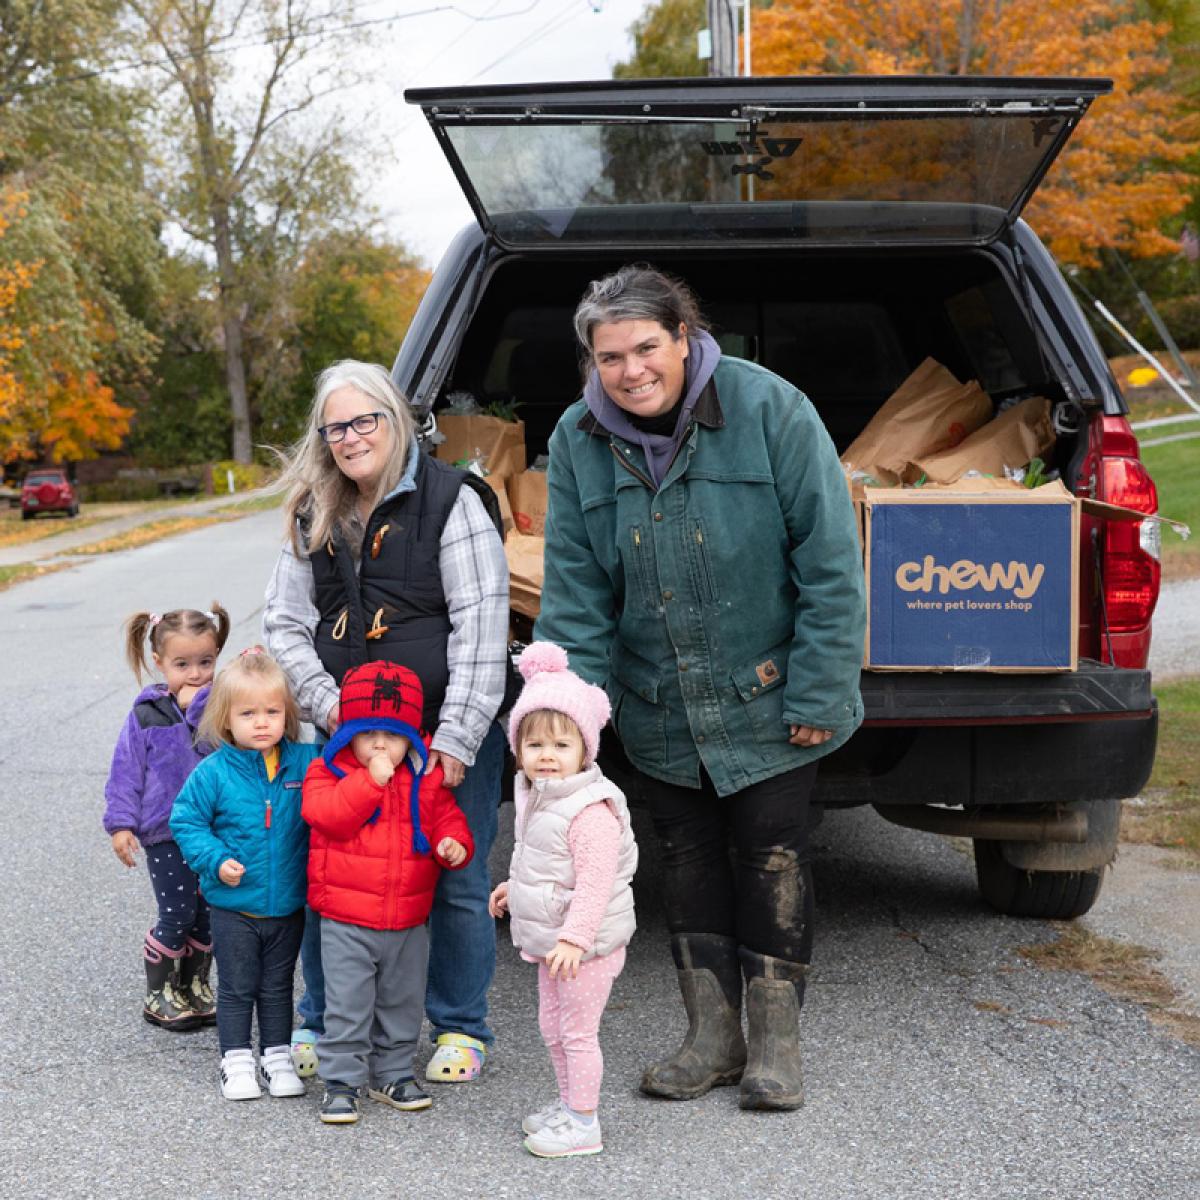 Laura Butler, the kids she cares for and teaches at her home-based childcare program, and farmer Christine Bourque of Blue Heron Farm on CSA drop-off day.